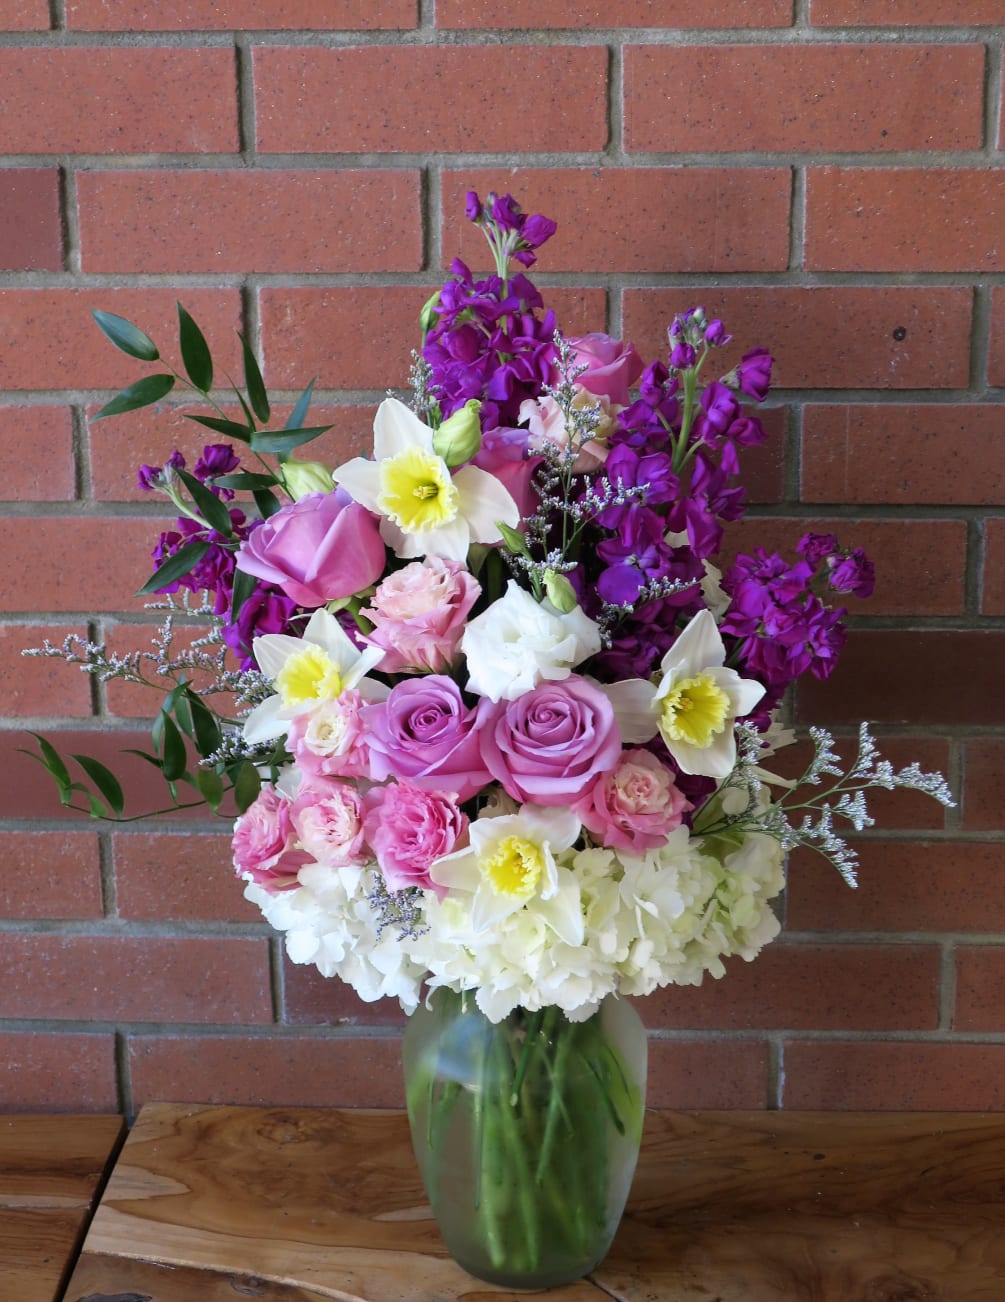 Beautiful spring bouquet with fragrant stock, daffodils, purple roses, hydrangeas, fillers and